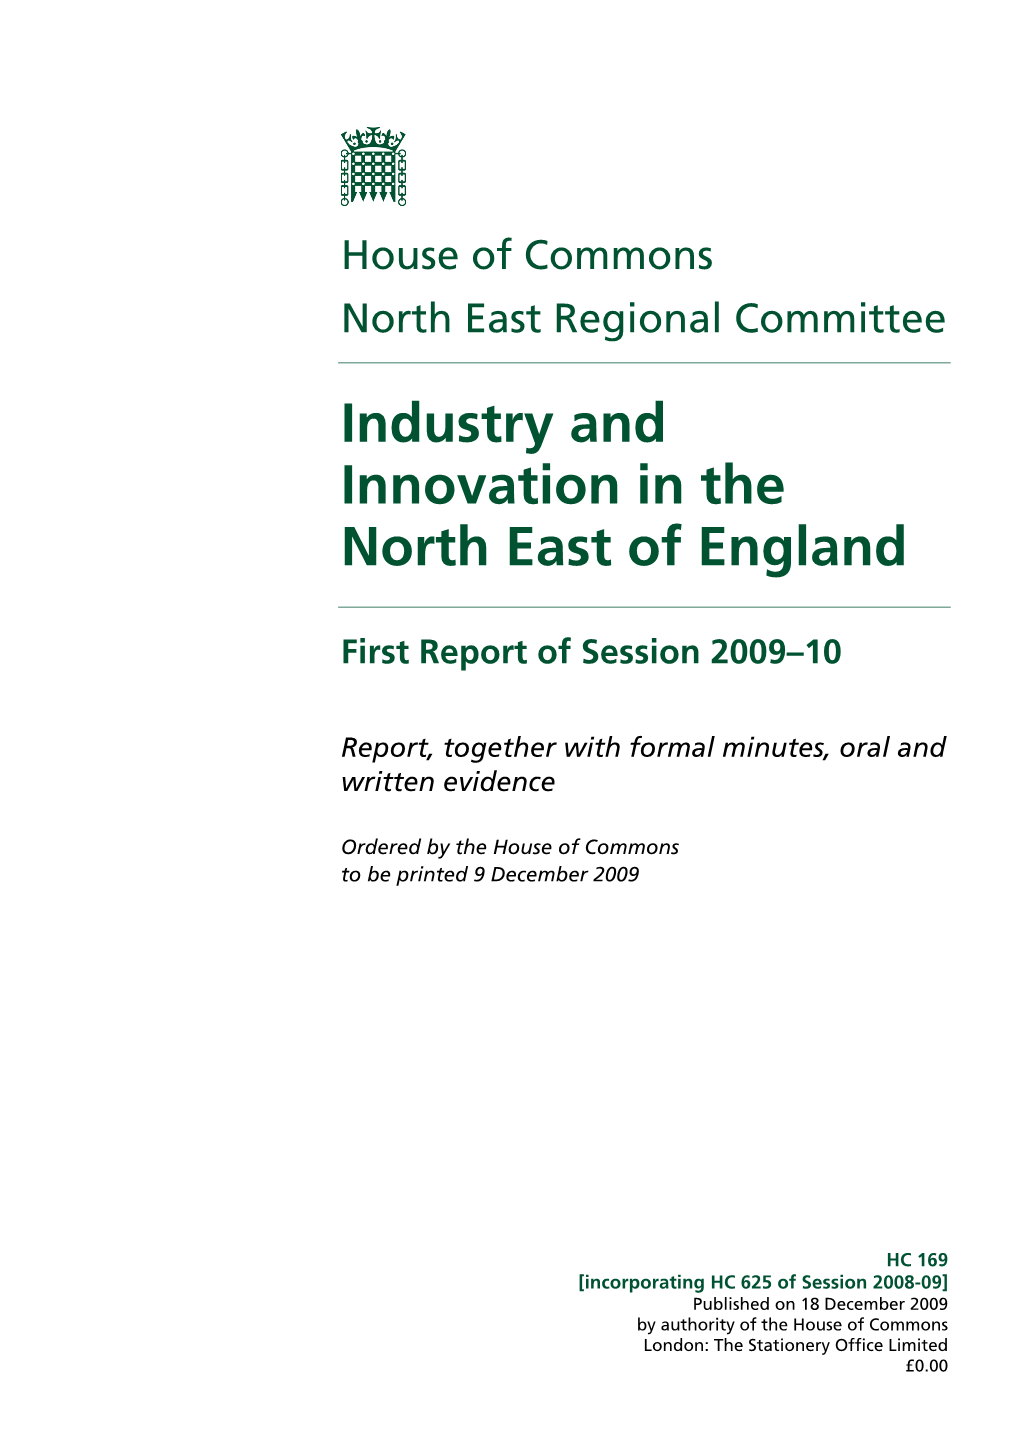 Industry and Innovation in the North East of England